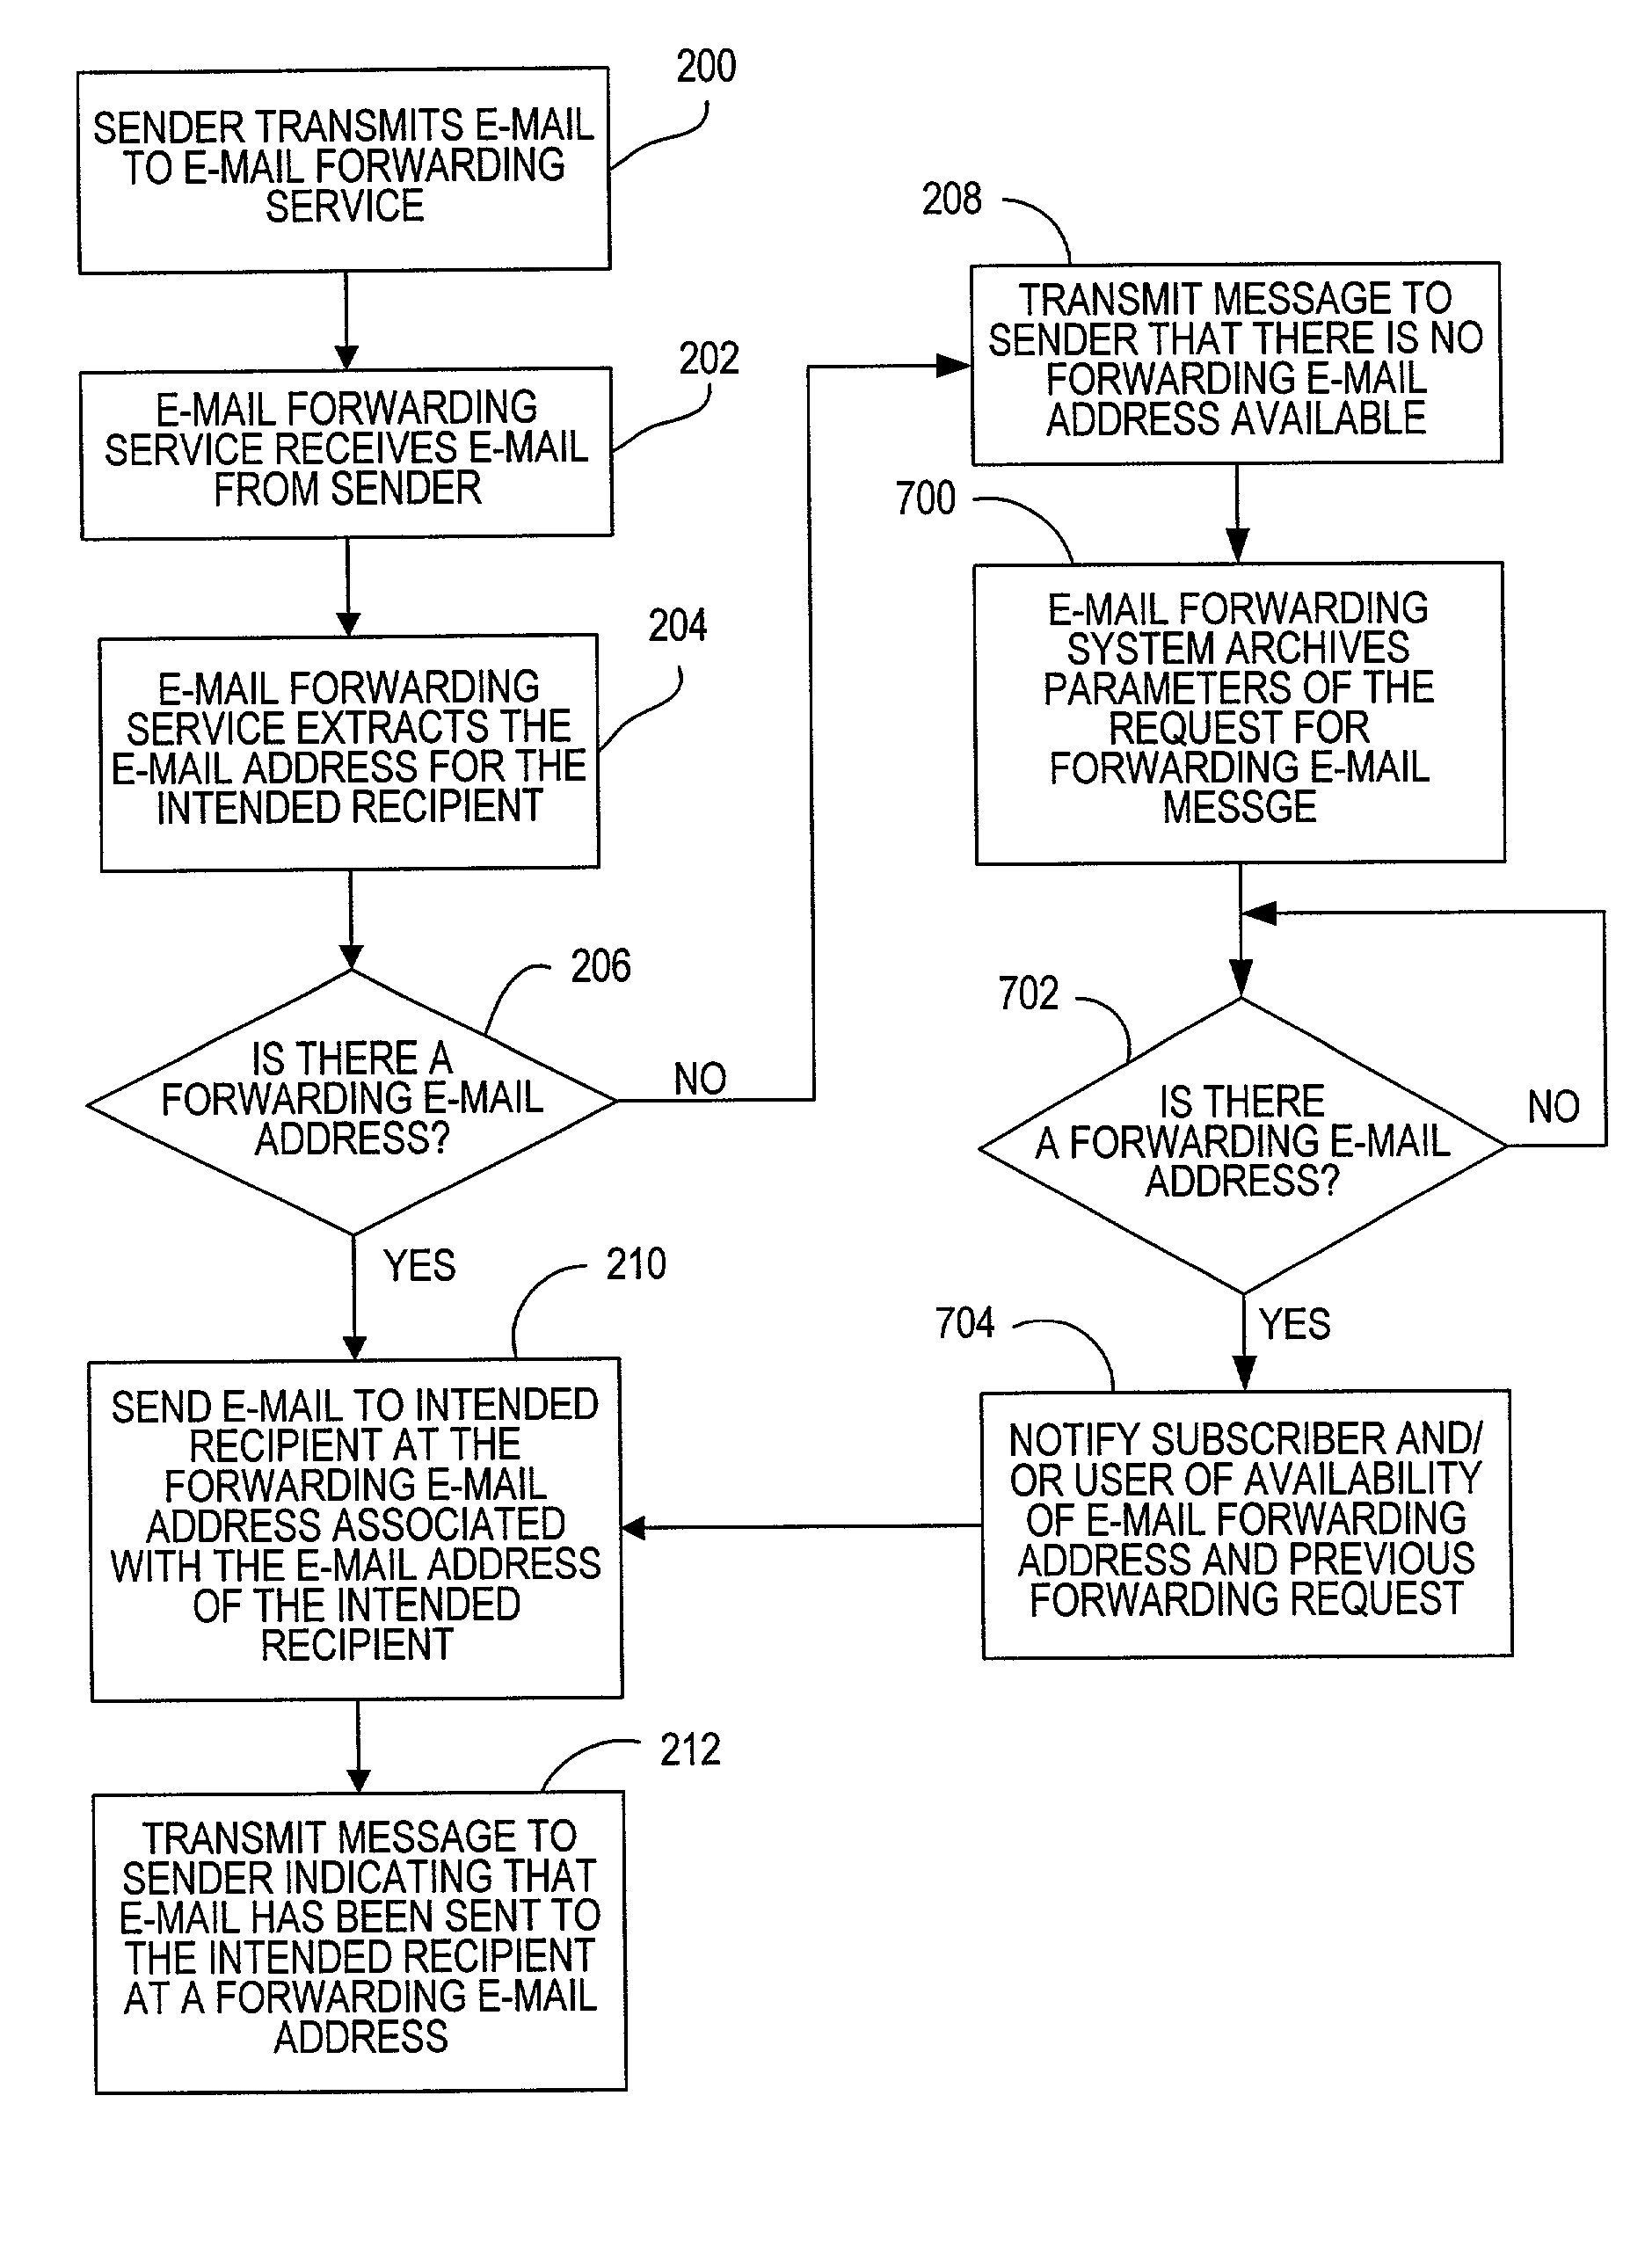 Method for providing address change notification in an electronic message forwarding system